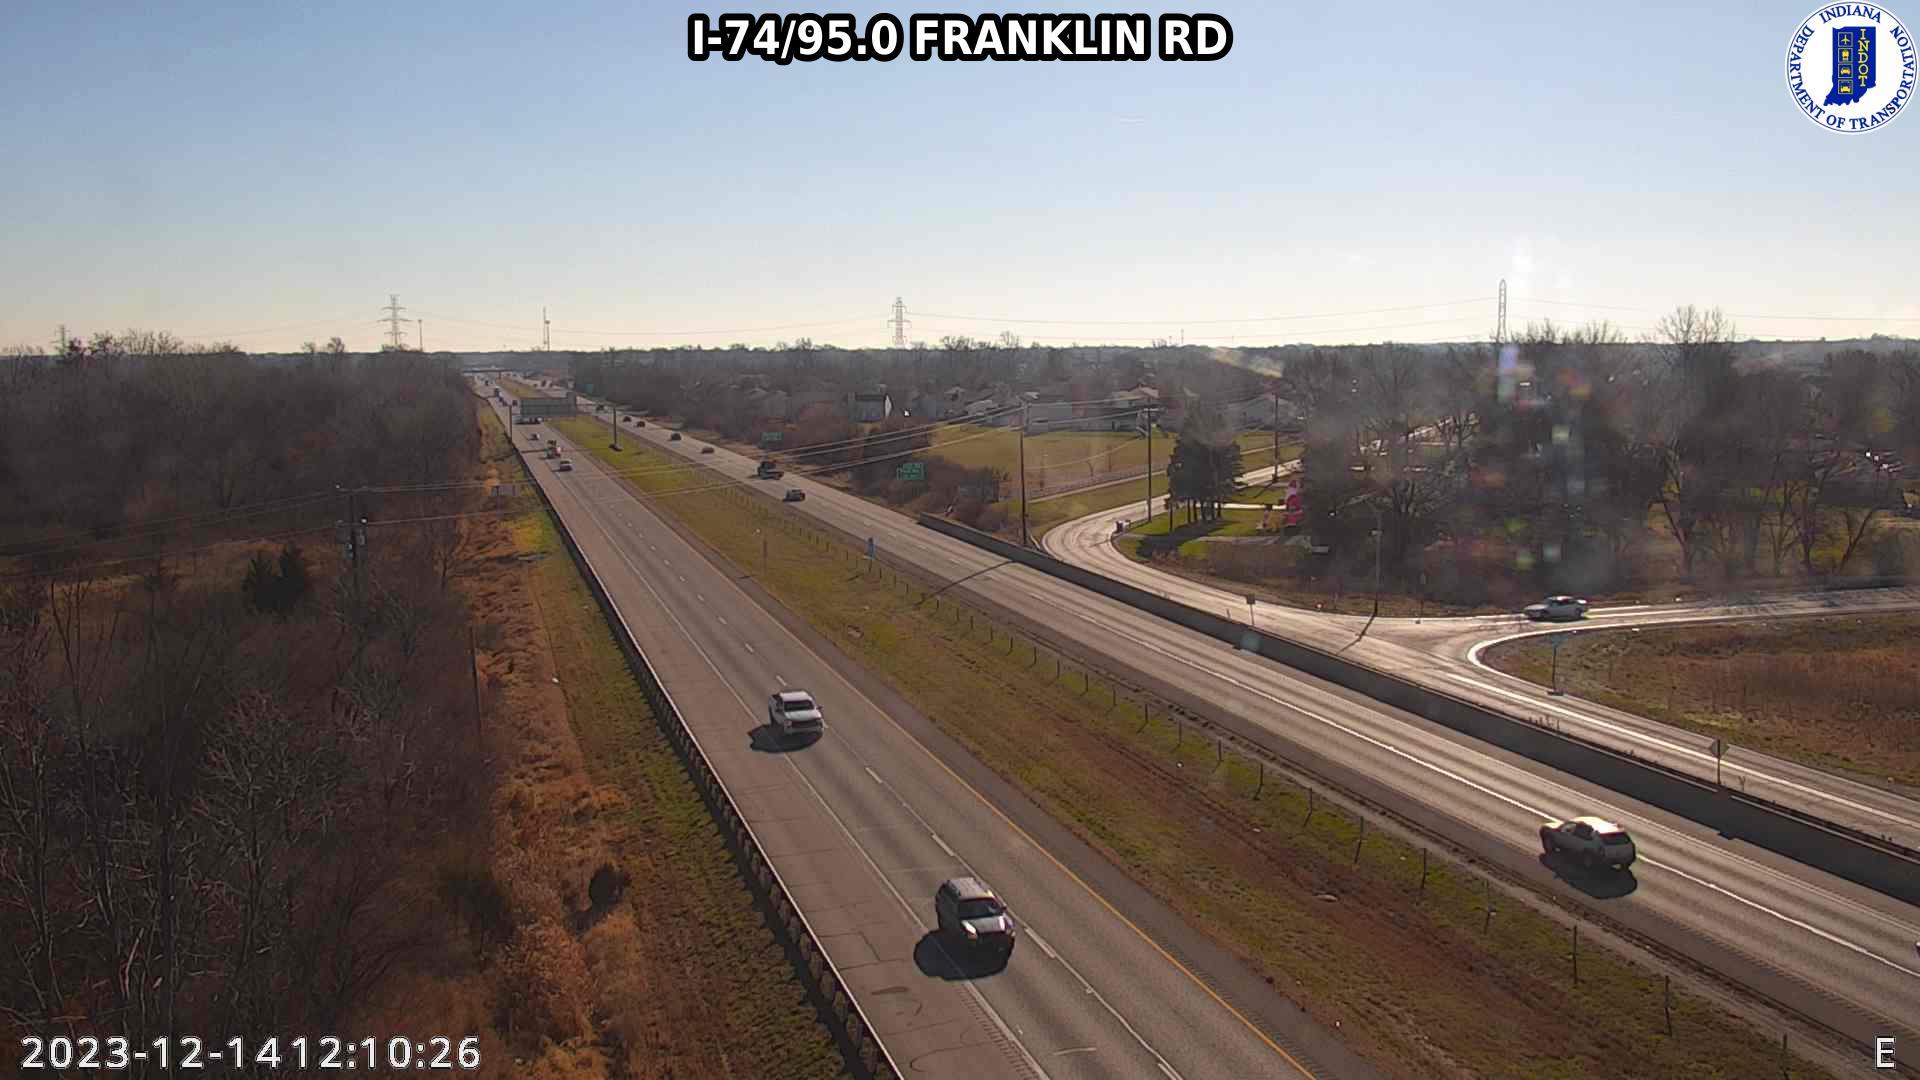 Traffic Cam Indianapolis: I-74: I-74/95.0 FRANKLIN RD Player